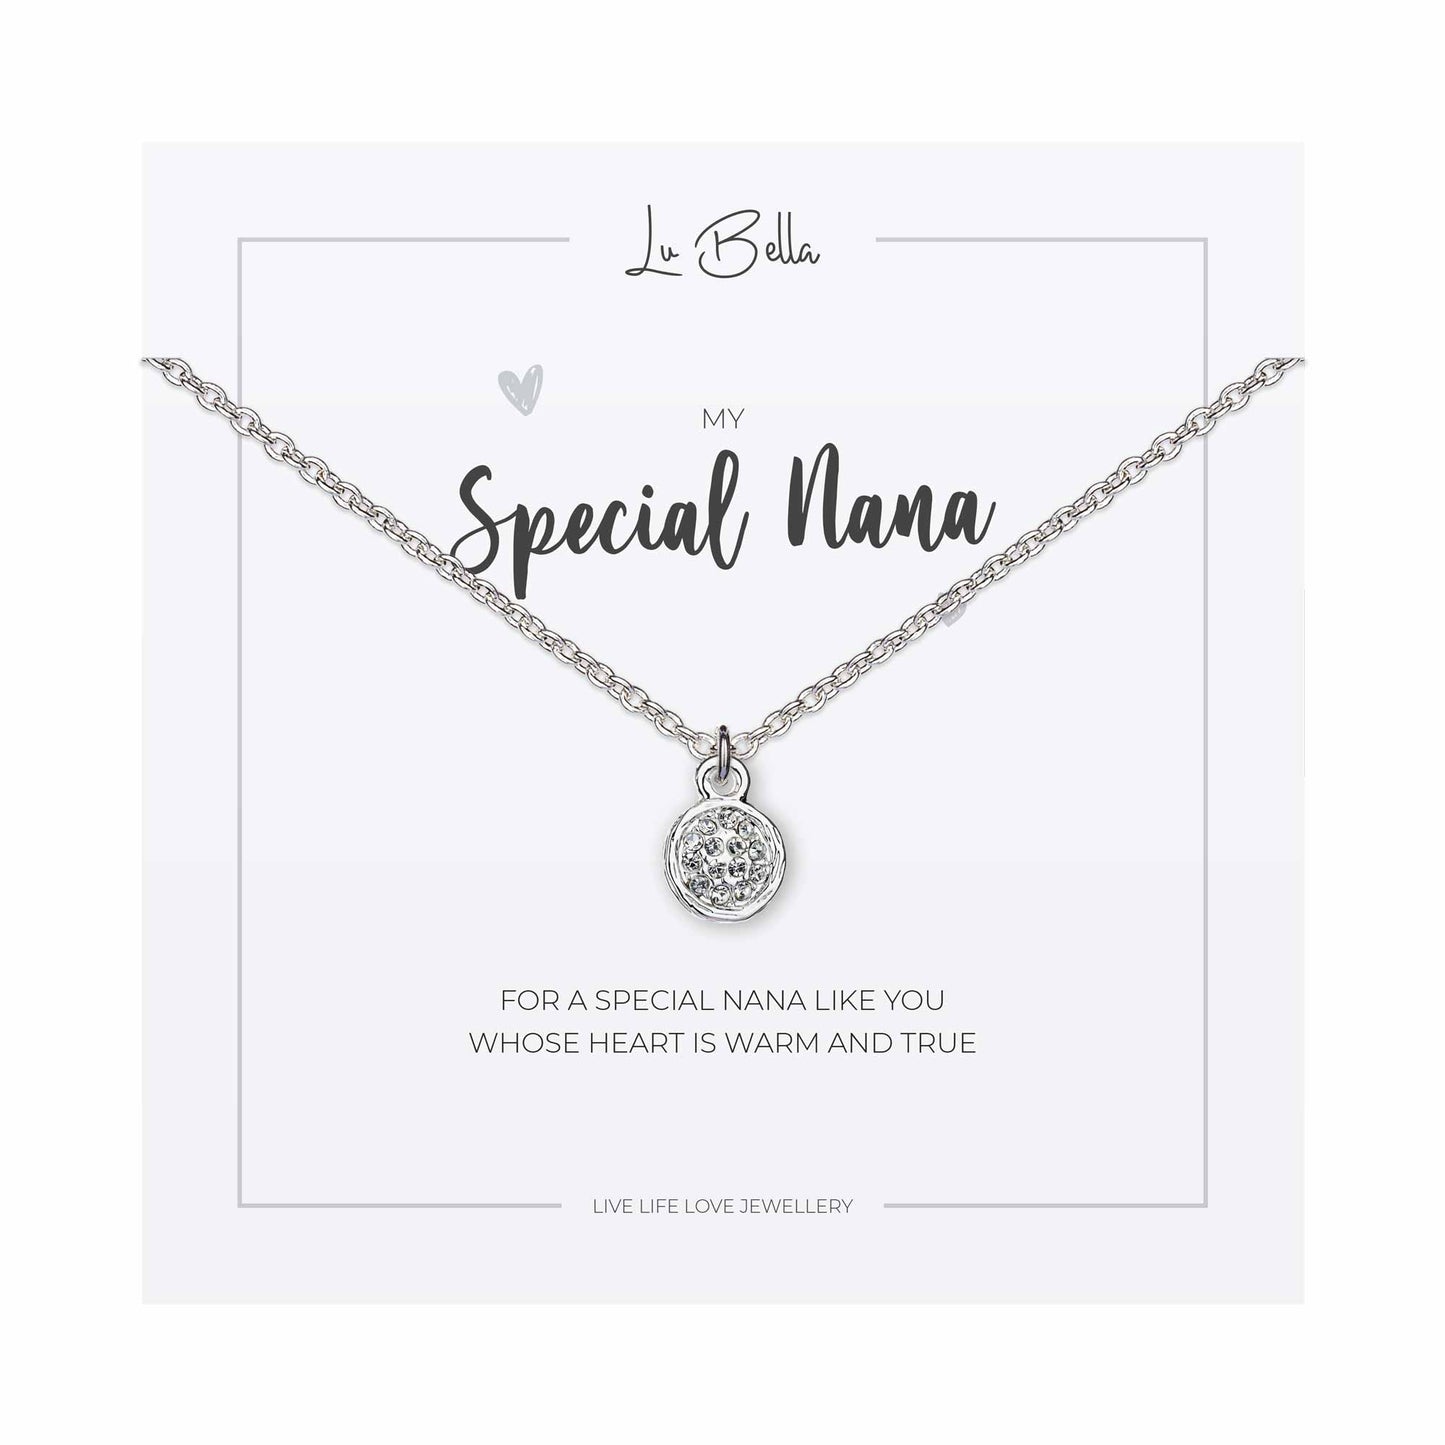 My Special Nana Sentiments Necklace